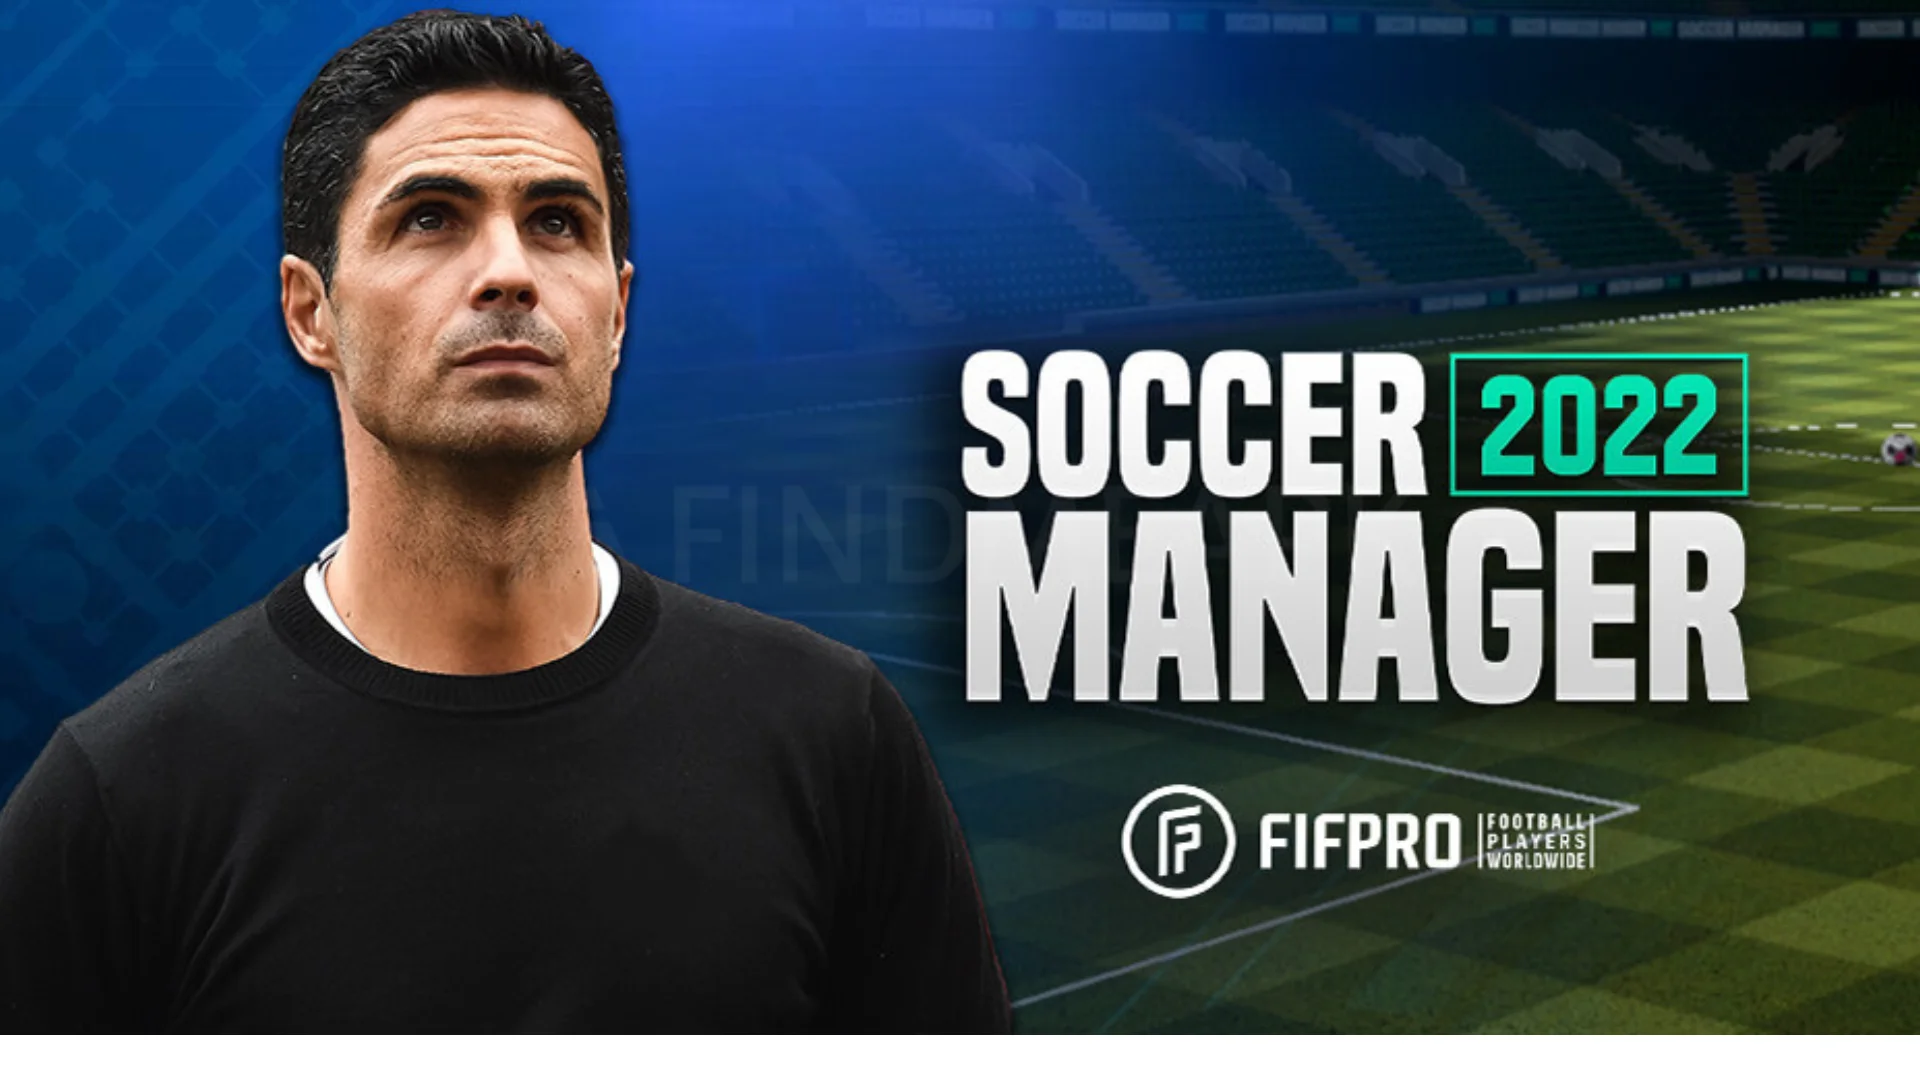 Soccer Manager 2022 MOD APK Featured Image